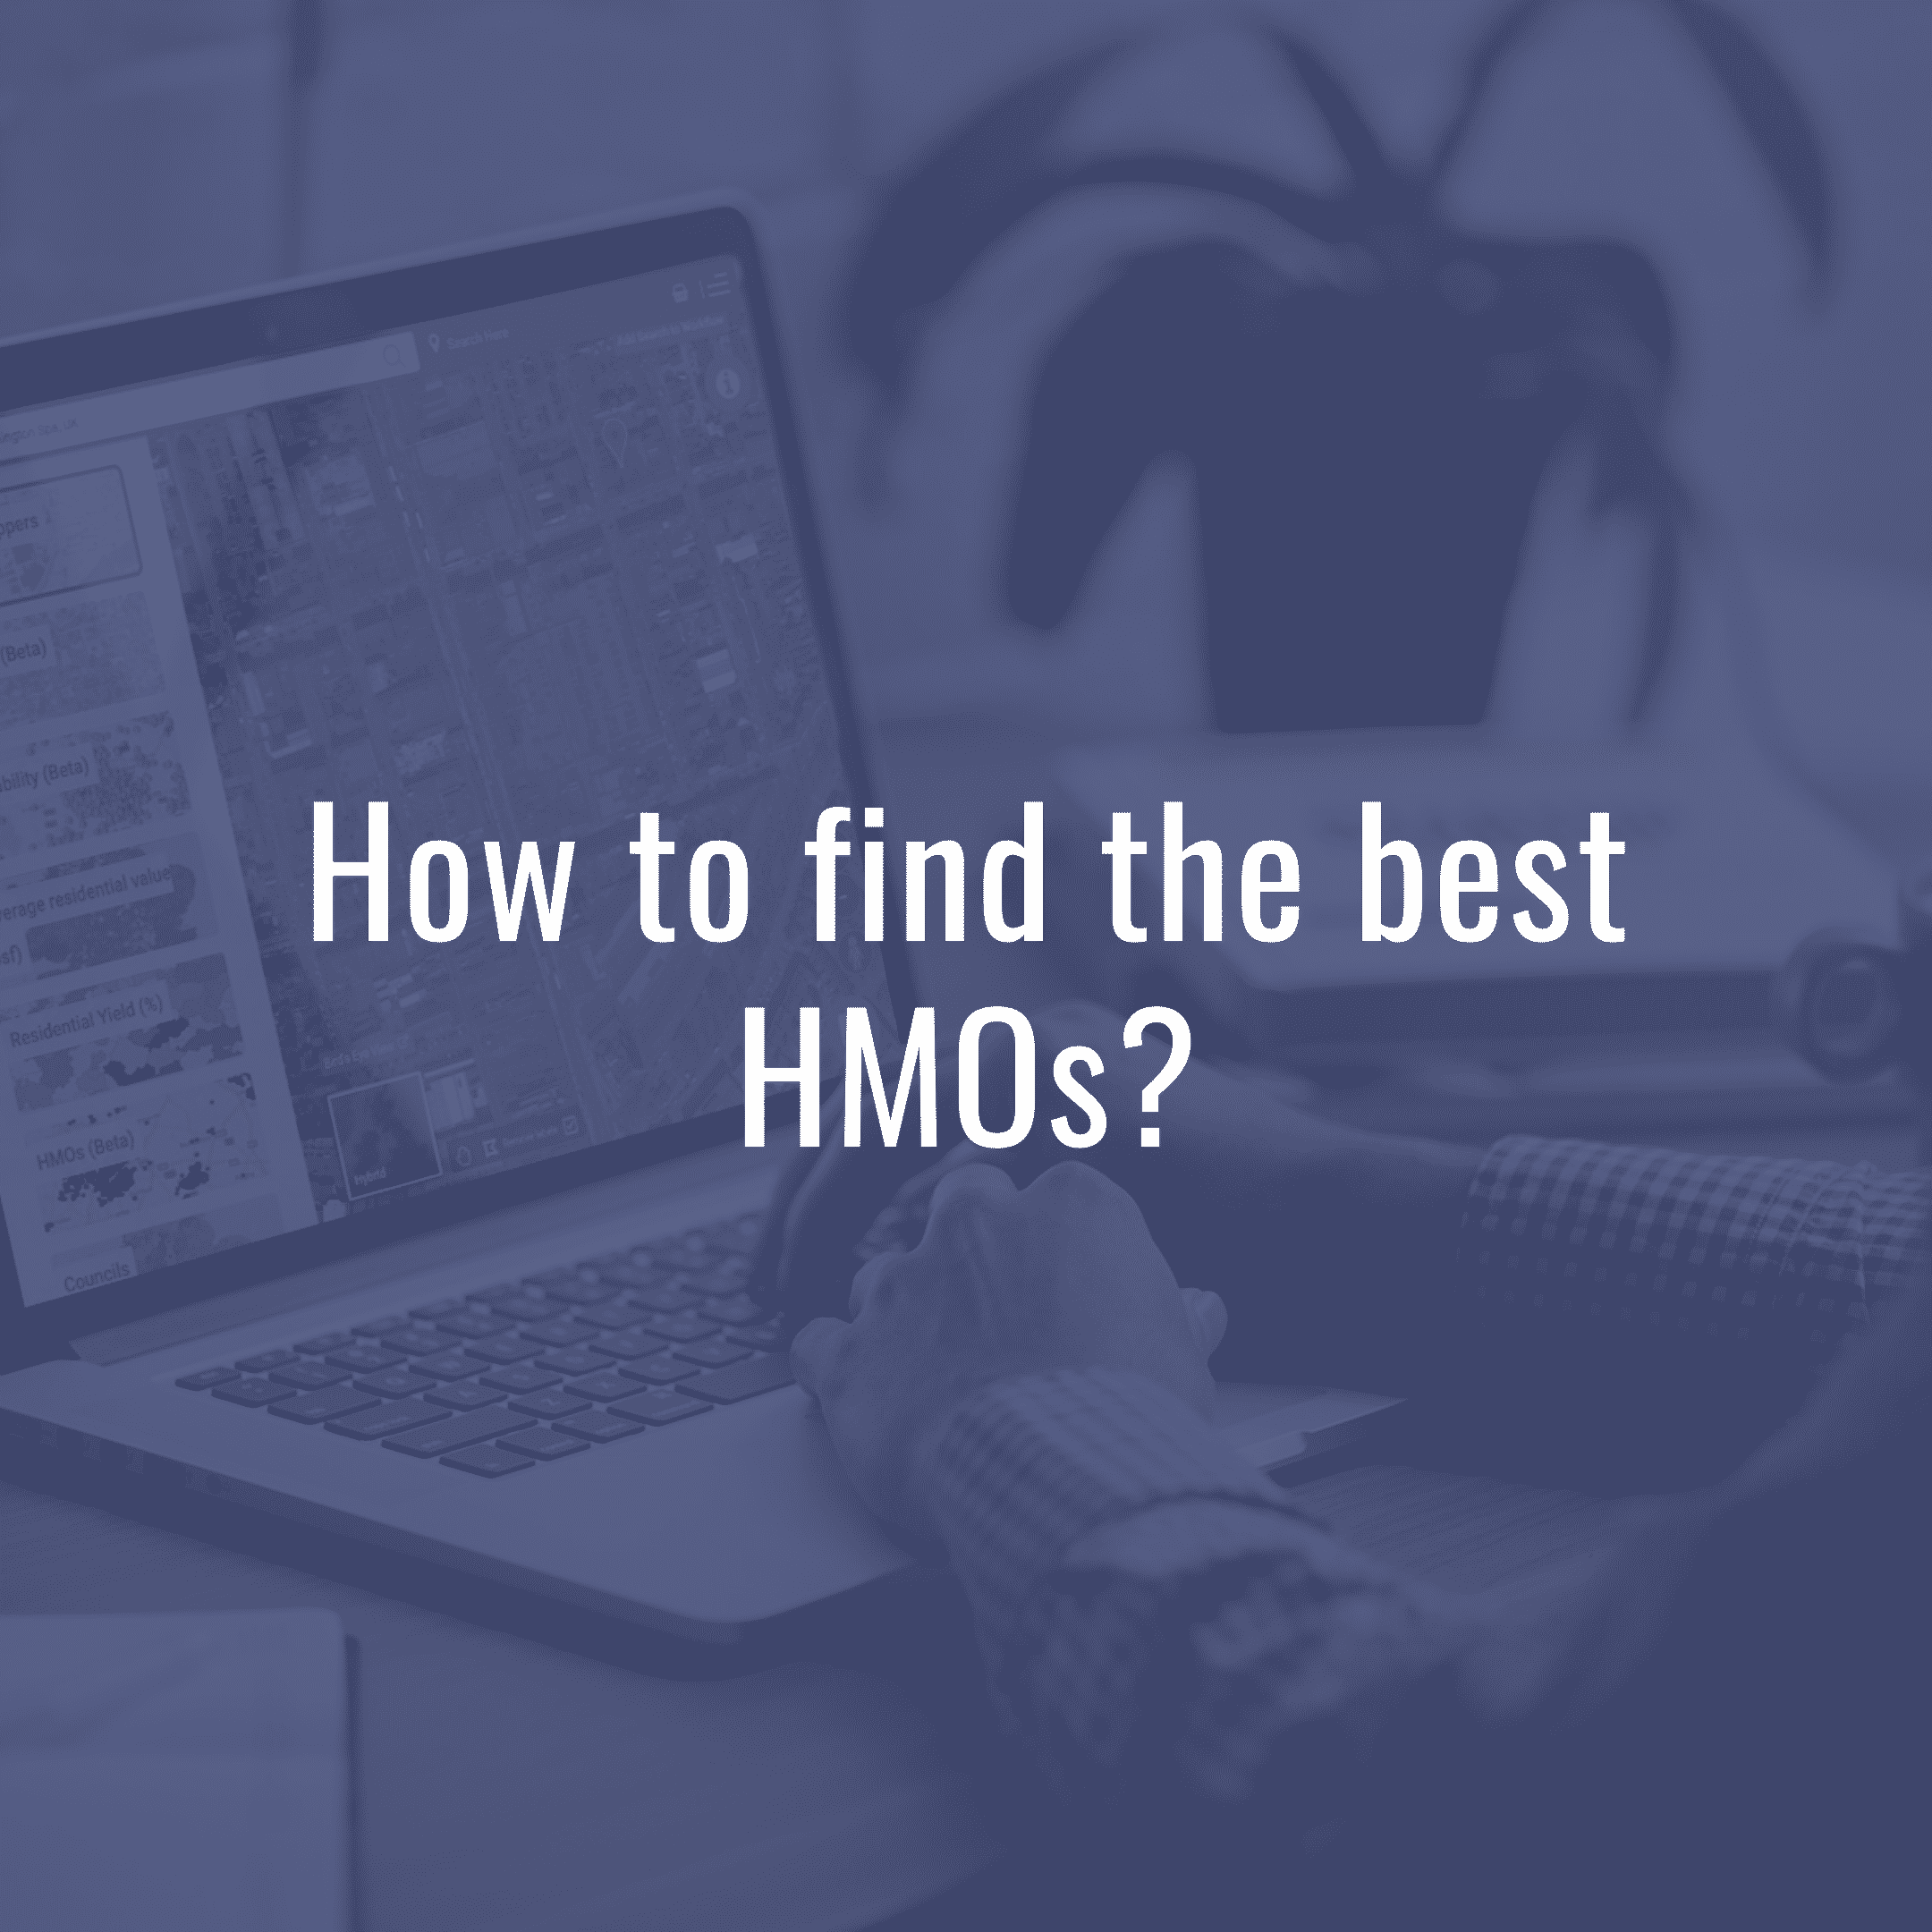 How to find the best HMOs?